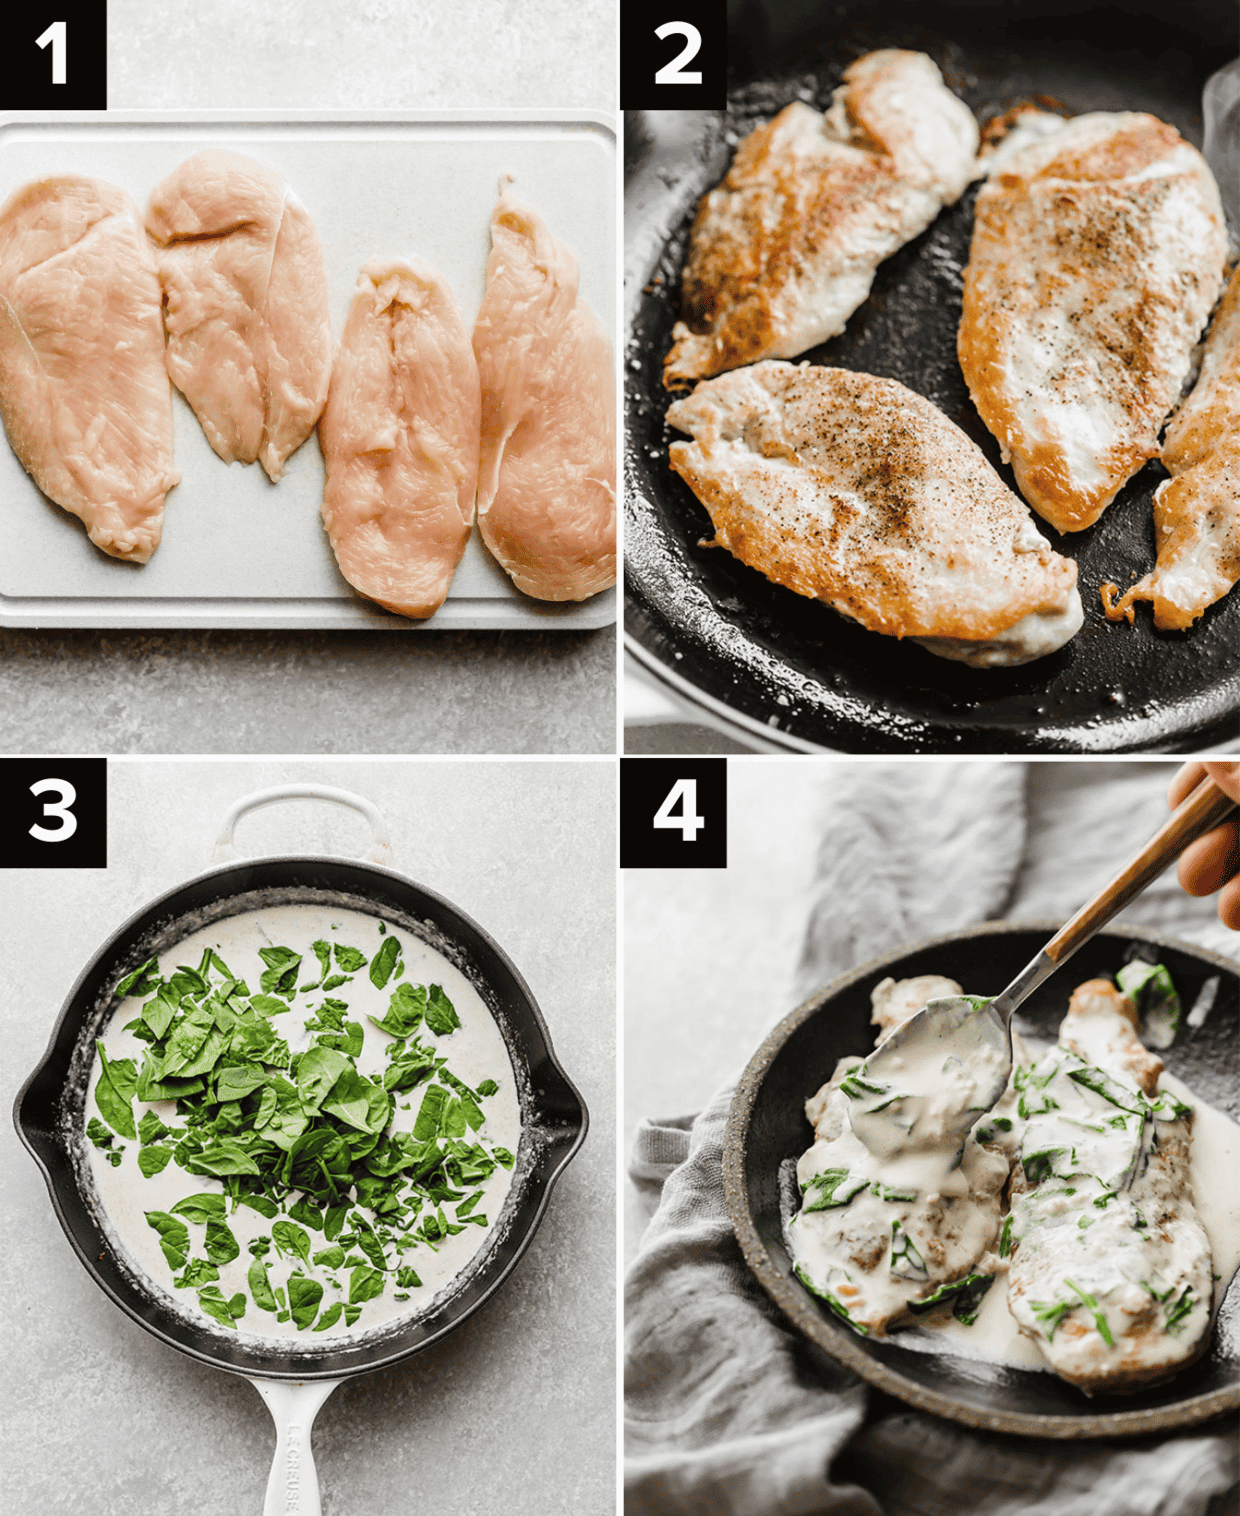 Four images showing how to make creamy chicken dijon, top left image is raw chicken breast on white cutting board, top right image is chicken cooked in skillet, bottom left image is fresh spinach in a white sauce in a skillet, bottom right image is Chicken Dijon Recipe on a black plate.